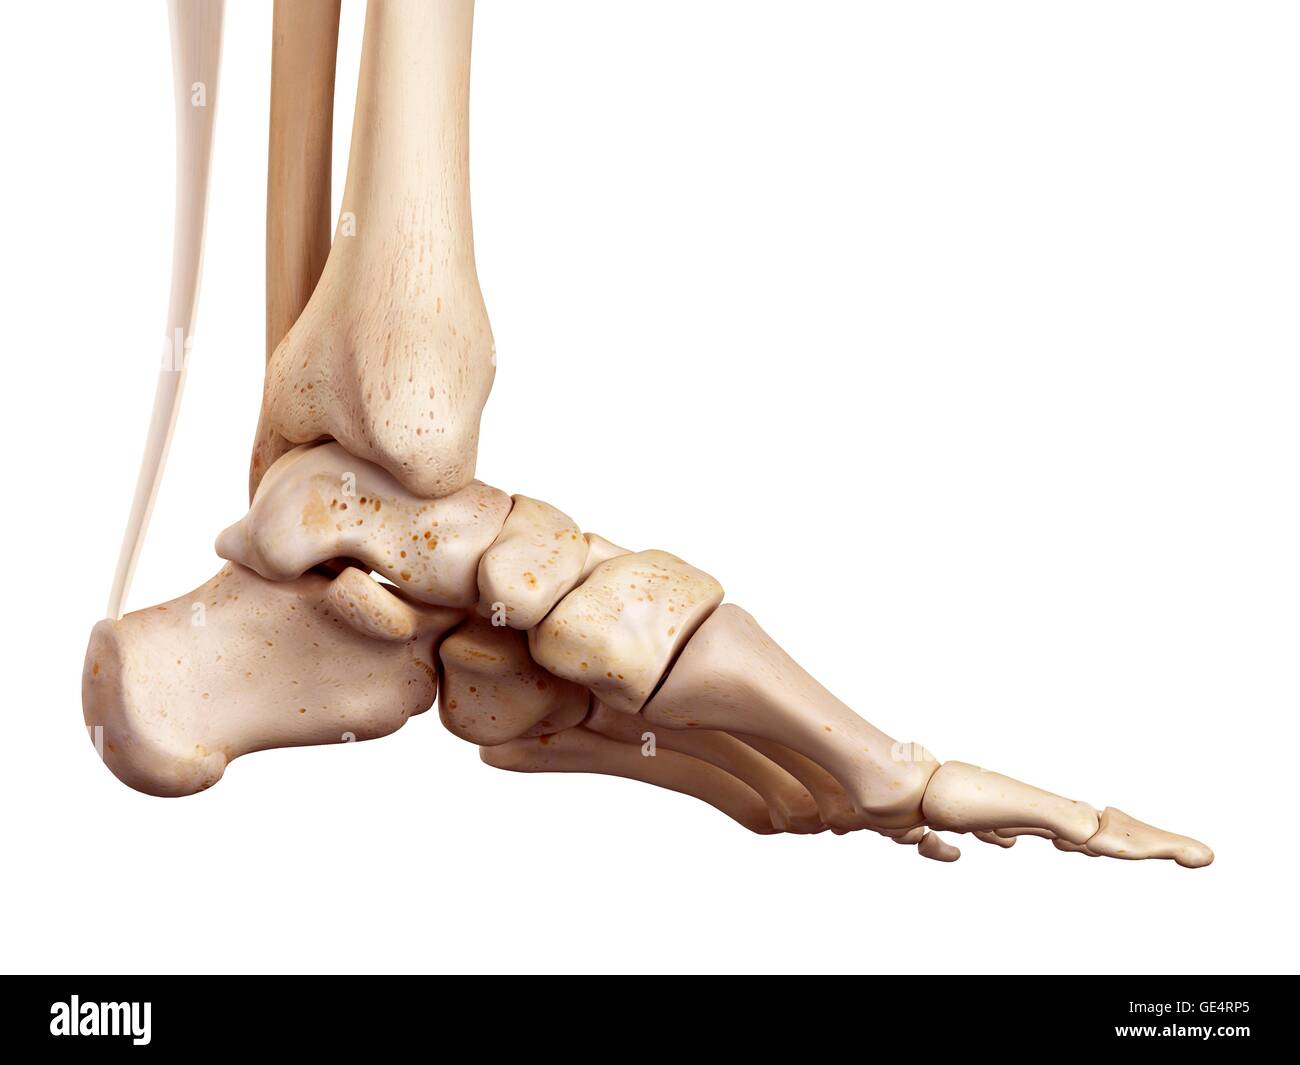 Achilles tendon of the human foot, illustration. Stock Photo